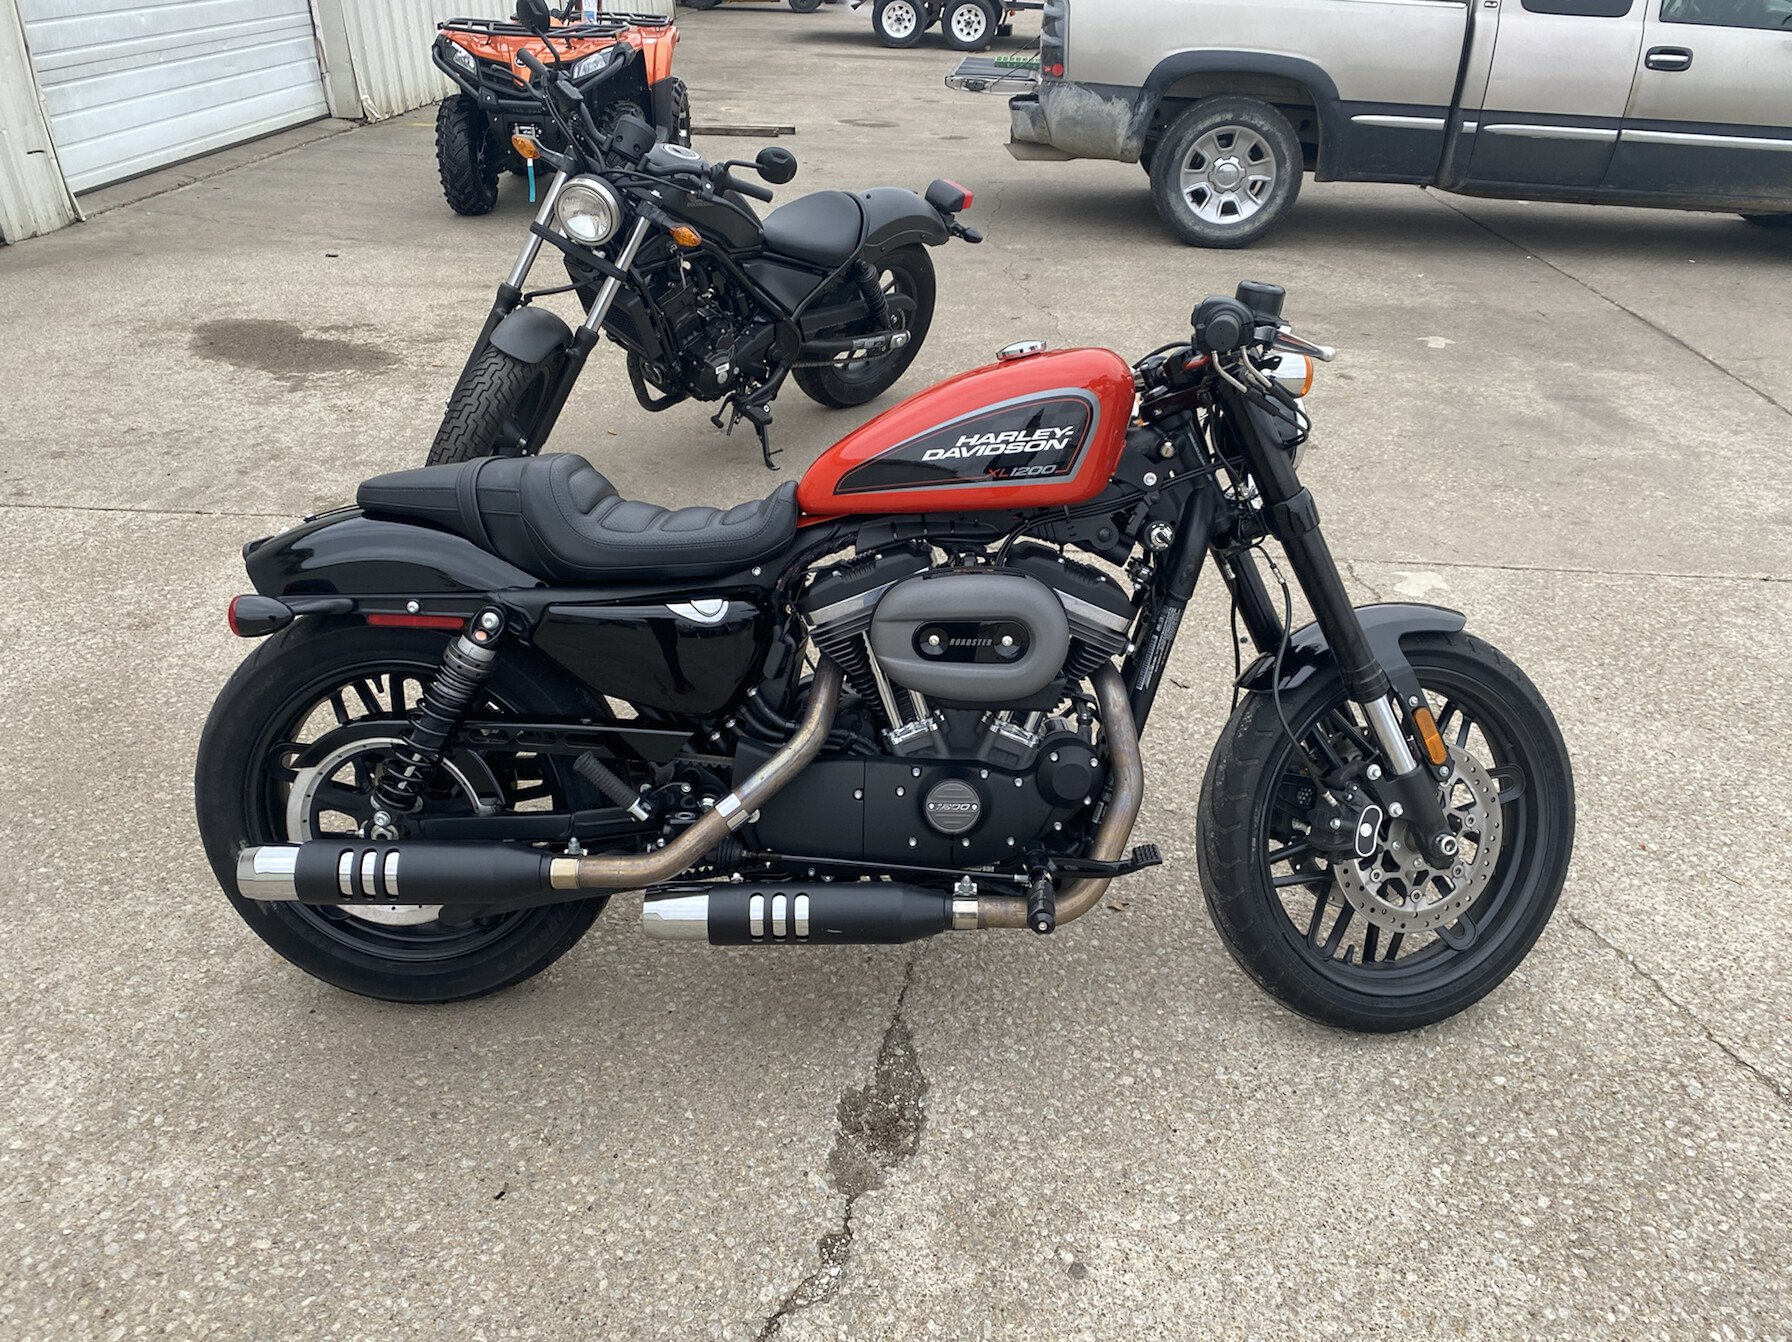 2020 Harley Davidson Sportster Roadster For Sale Near Decatur Illinois 62526 Motorcycles On Autotrader